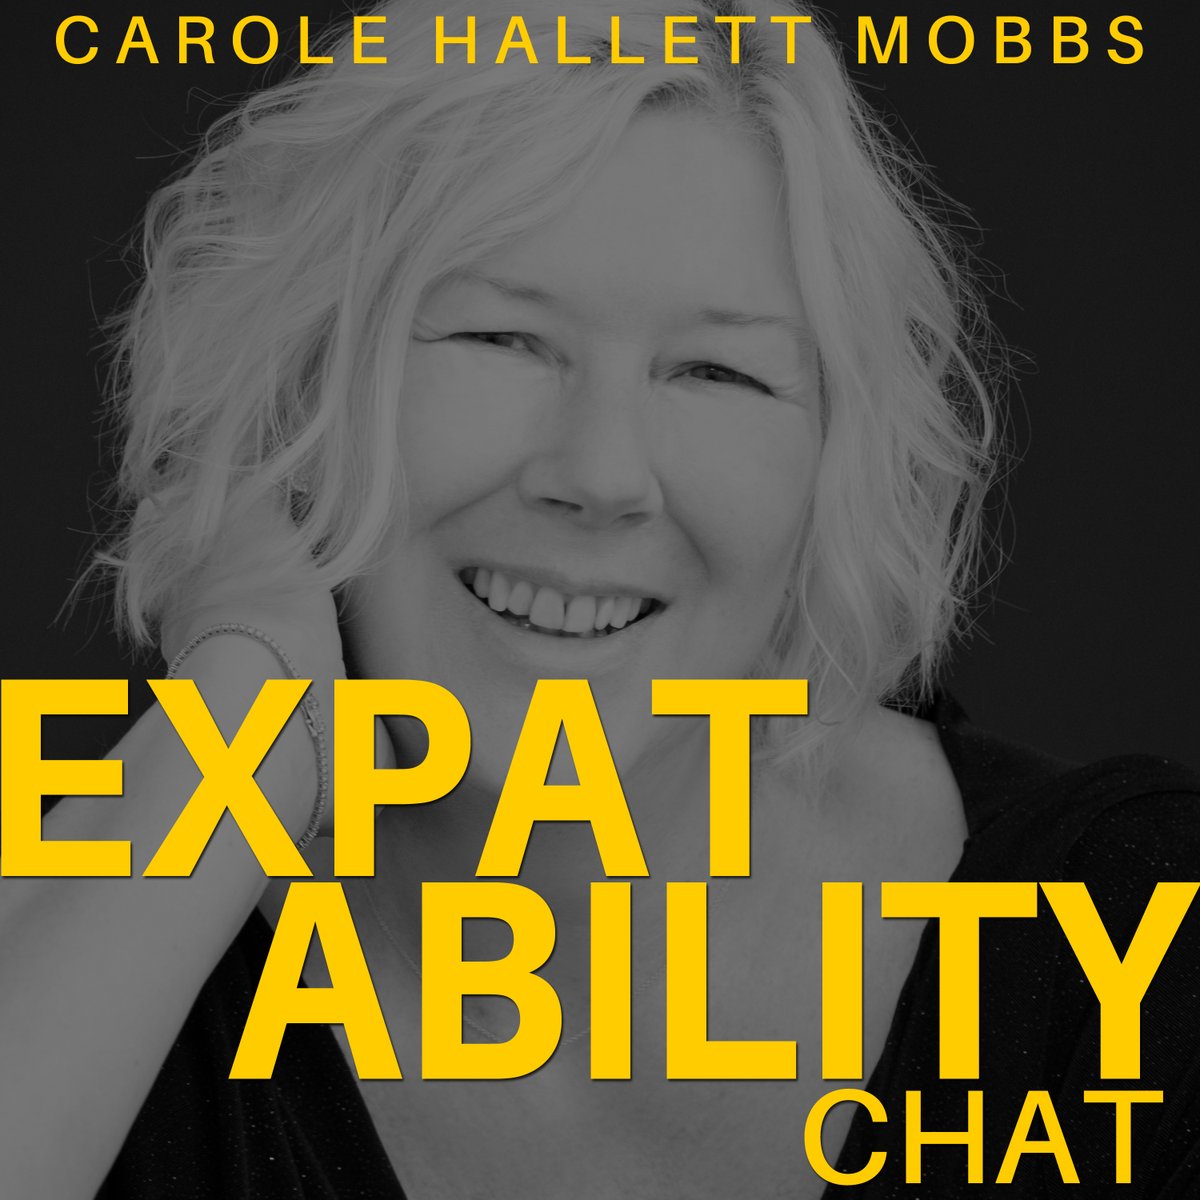 “MOVING ABROAD WAS A HUGE MISTAKE” I wish I could say this is an isolated comment from the expat sphere. But sadly, it’s not. I share this particular case study on my podcast episode here: #expat #expatlife #podcast sbee.link/y9m7jcf6pt